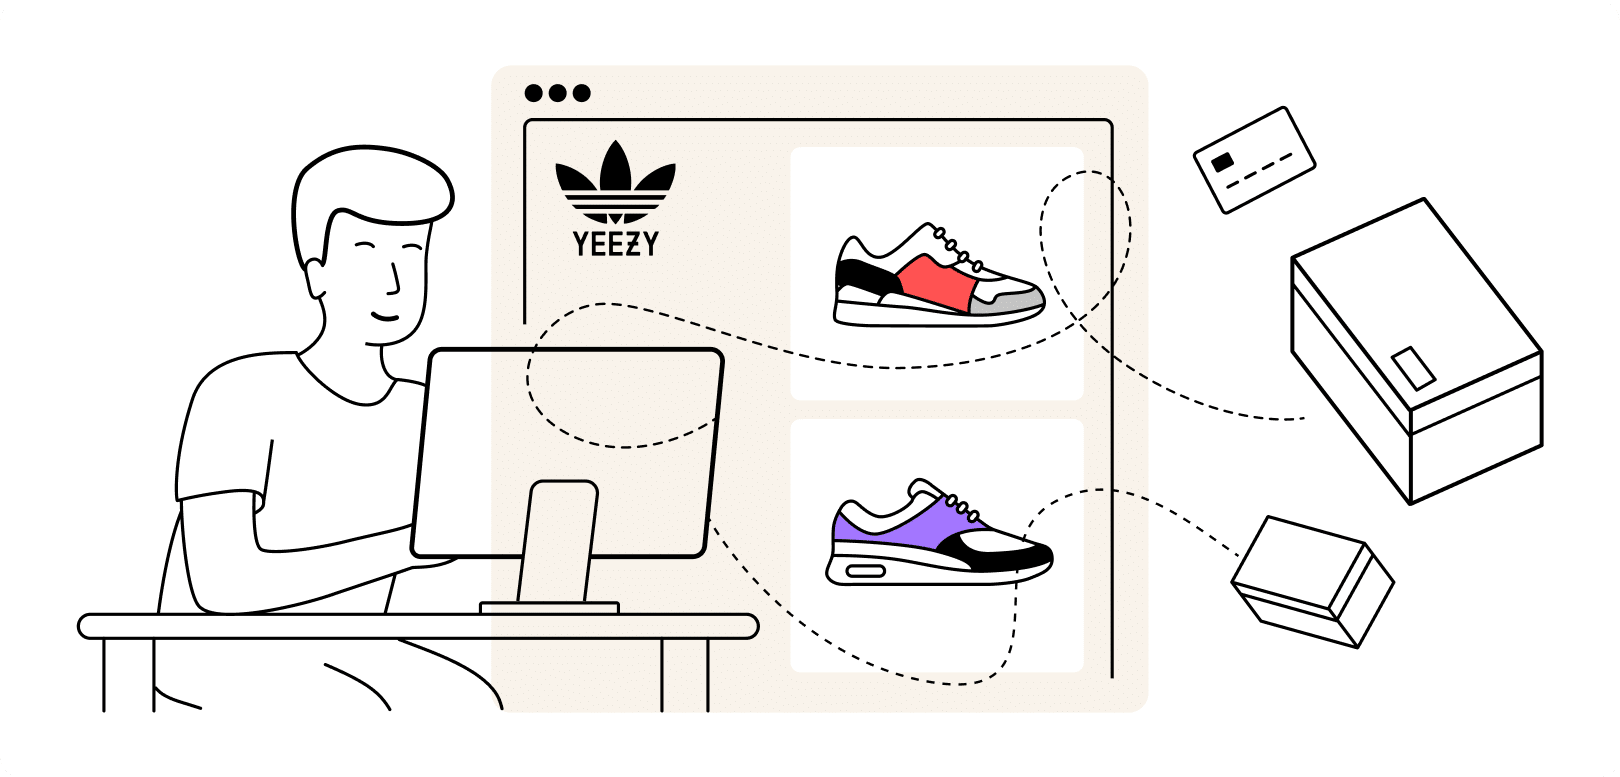 How to Choose the Best Proxies for Sneaker Botting